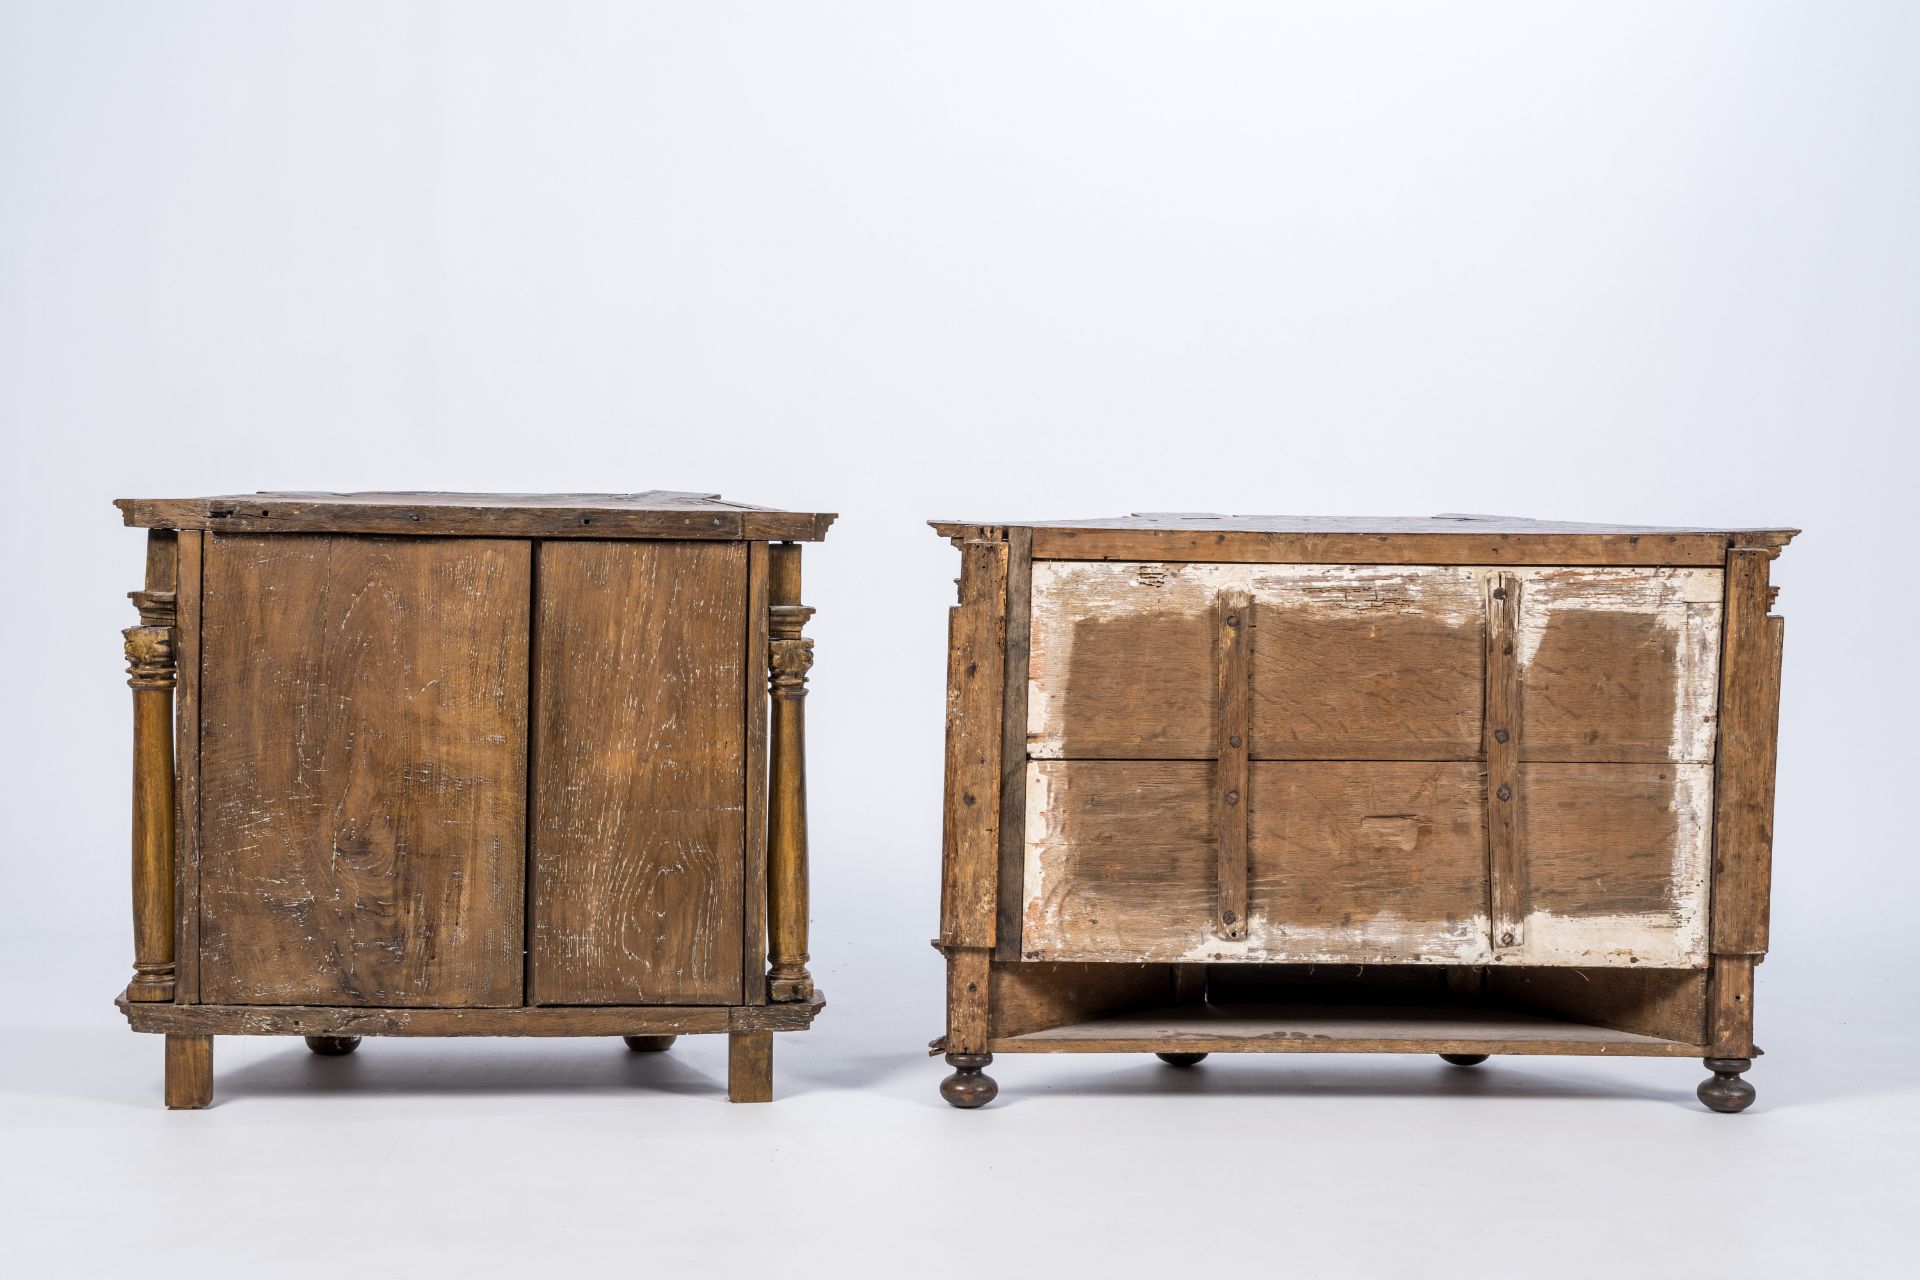 Two Flemish four-cornered wood tabernacles with twisted and Corinthian columns, 17th/18th C. - Image 4 of 8